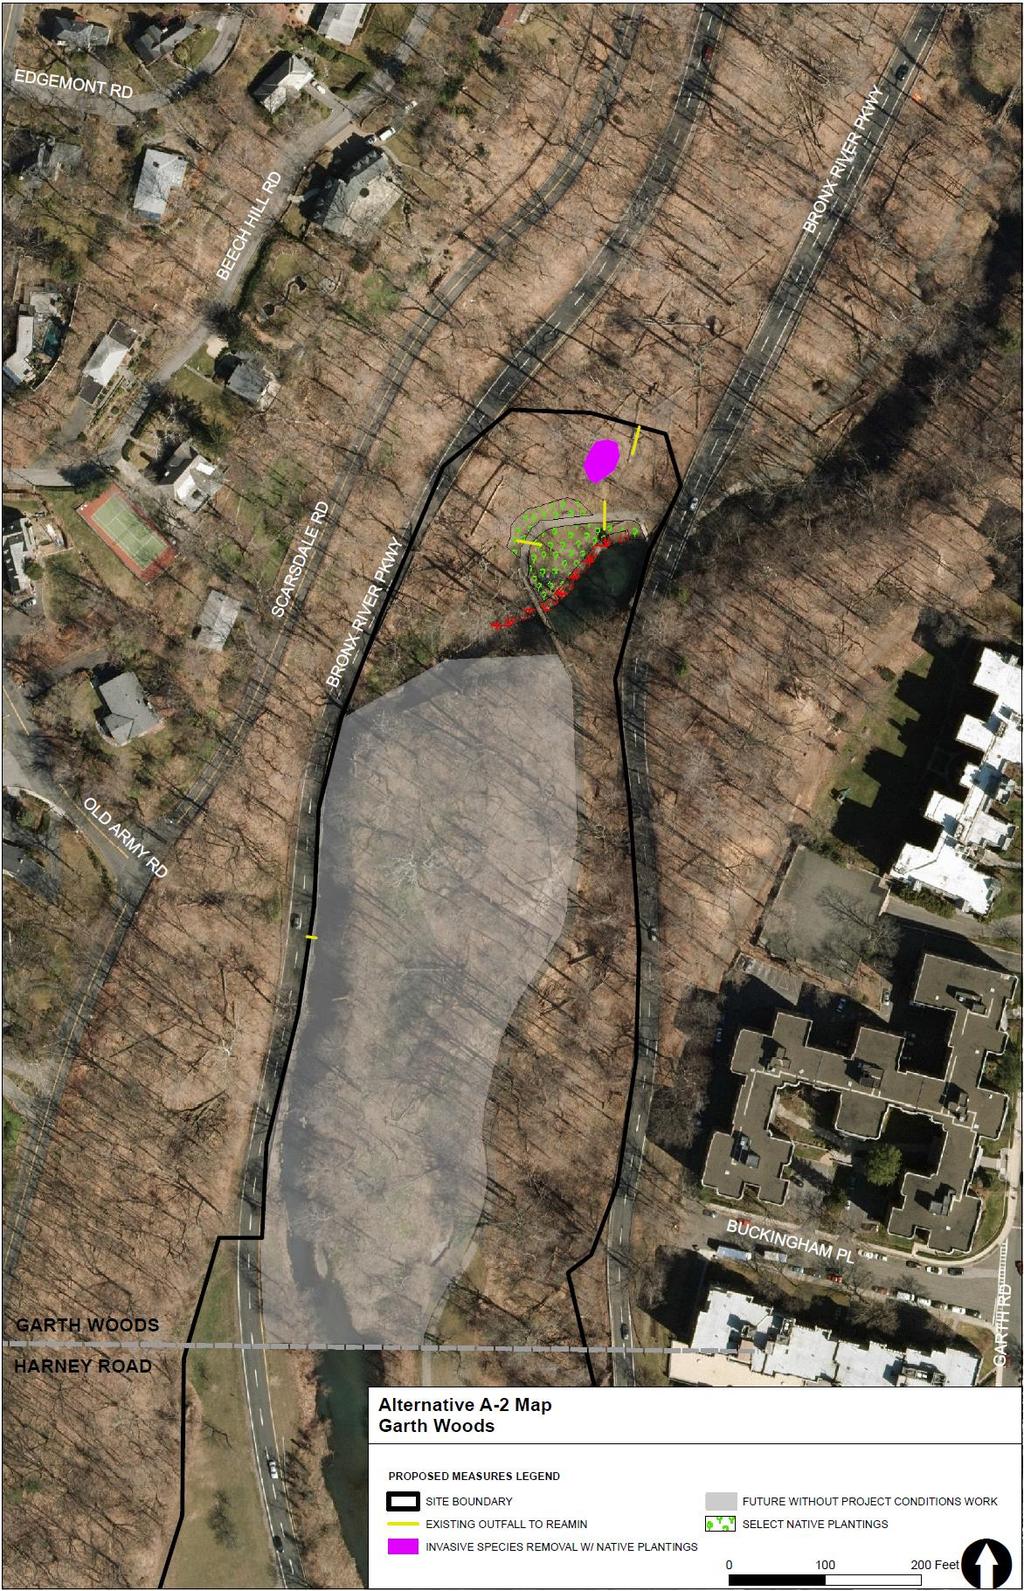 Construction of three culverts under the southbound lanes of Bronx River Parkway to transfer river water to emergent cattail-dominated wetlands created throughout most of the maintained lawn area on